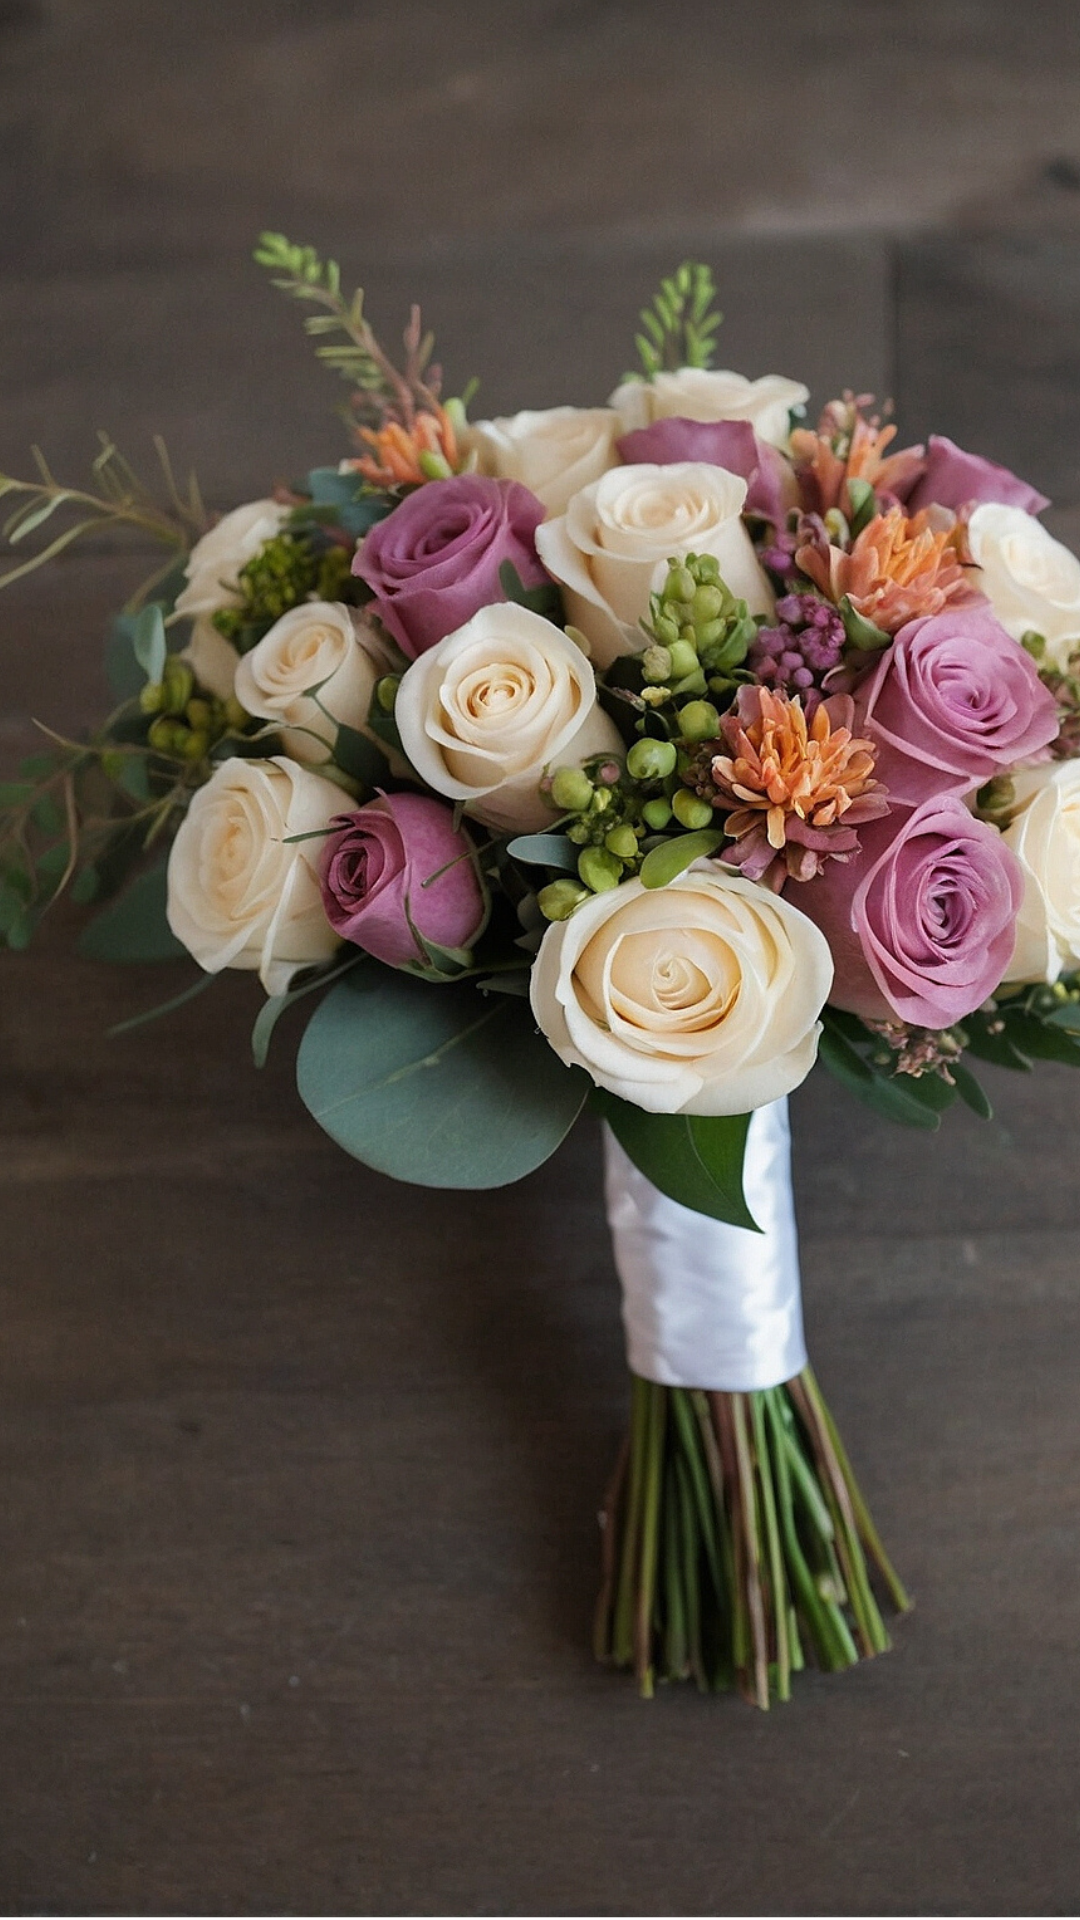 Stylish Mixed Flower Bouquets for Prom